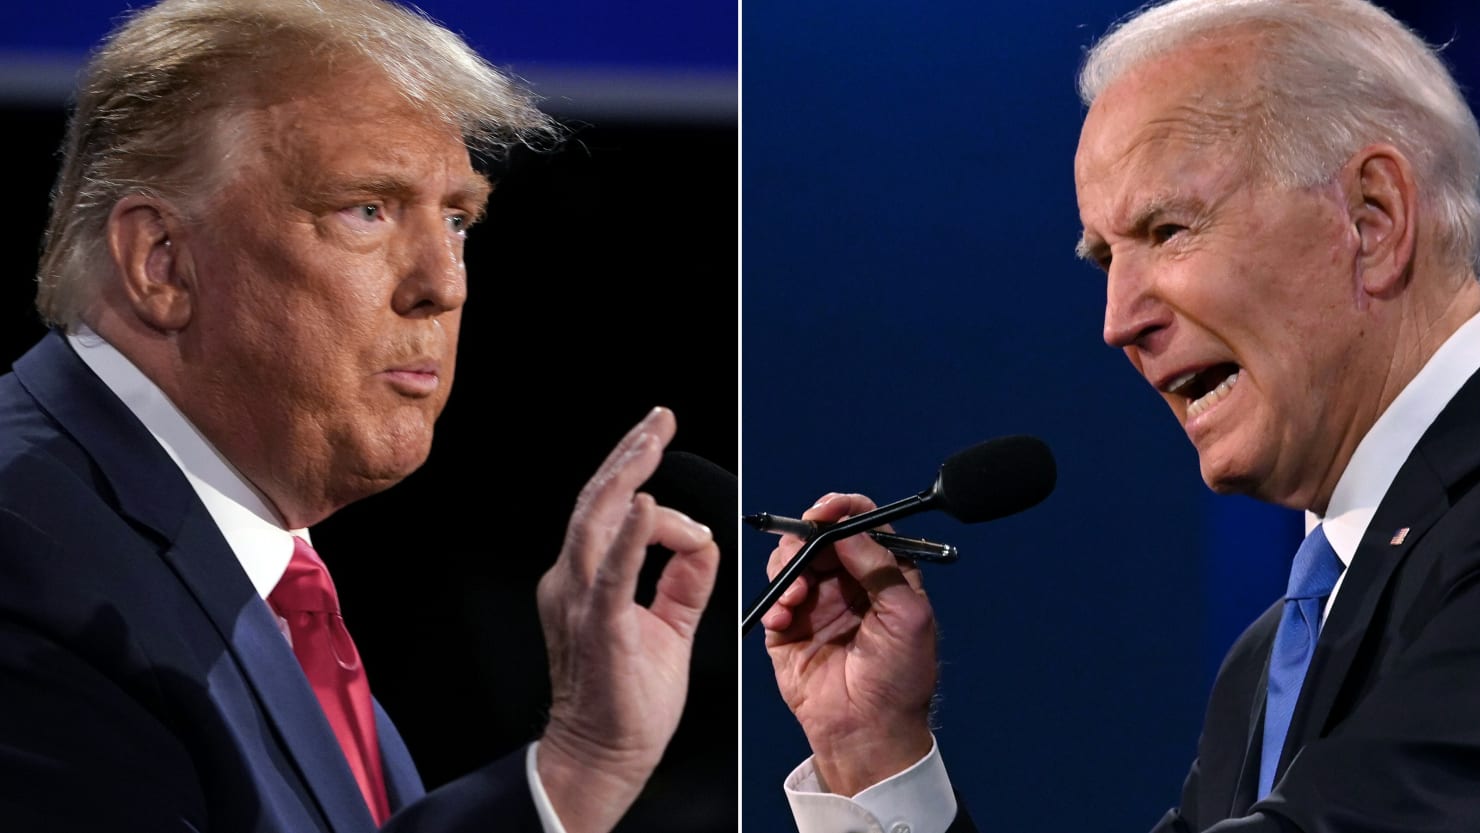 Joe Biden and Donald Trump’s Classified Doc Scandals Are Worlds Apart